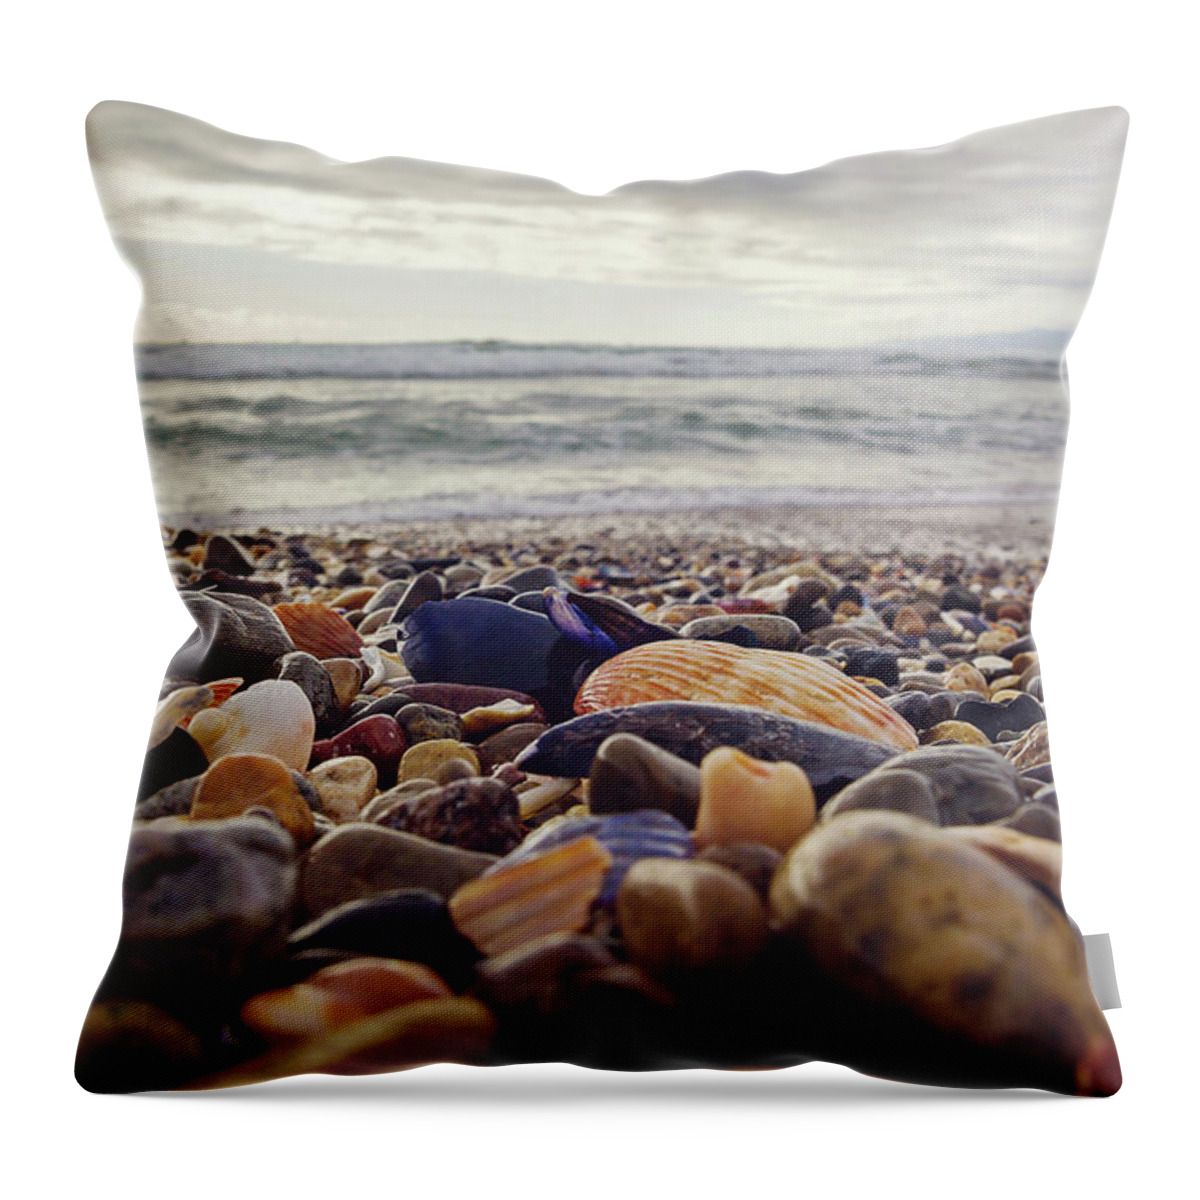  Throw Pillow featuring the photograph Rocky Shore by April Reppucci